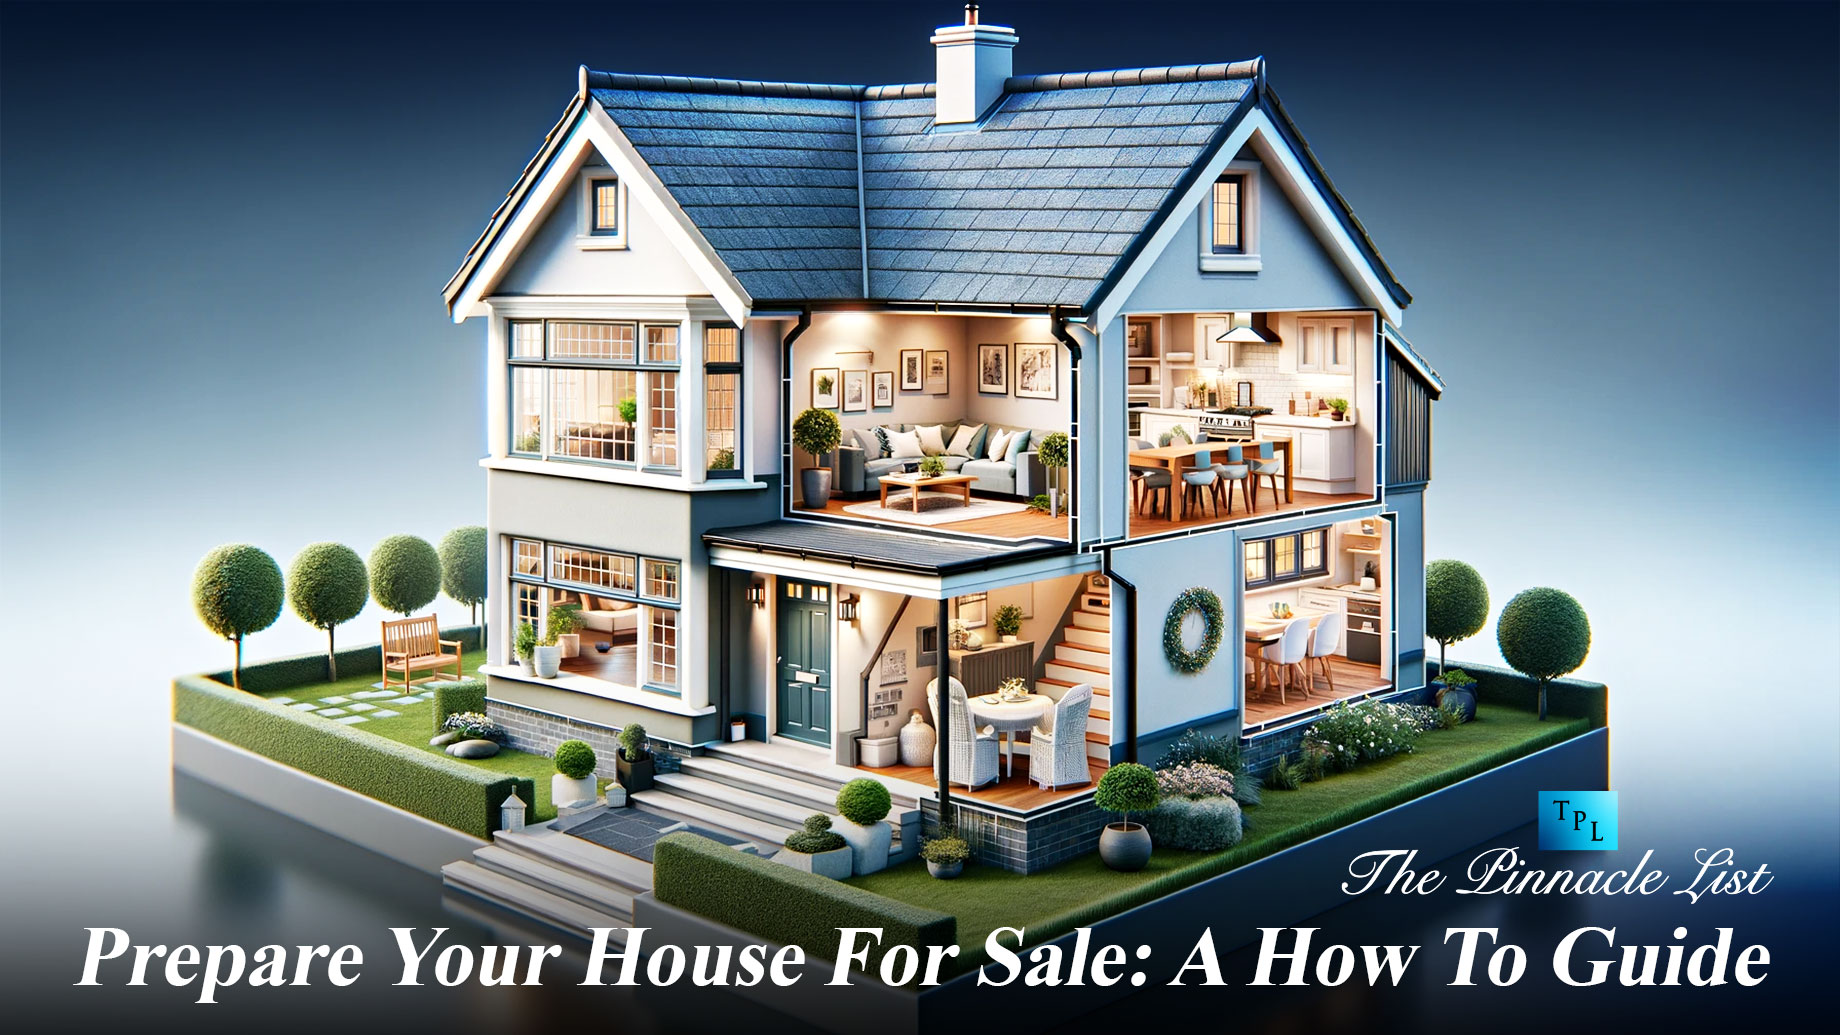 Prepare Your House For Sale: A How To Guide